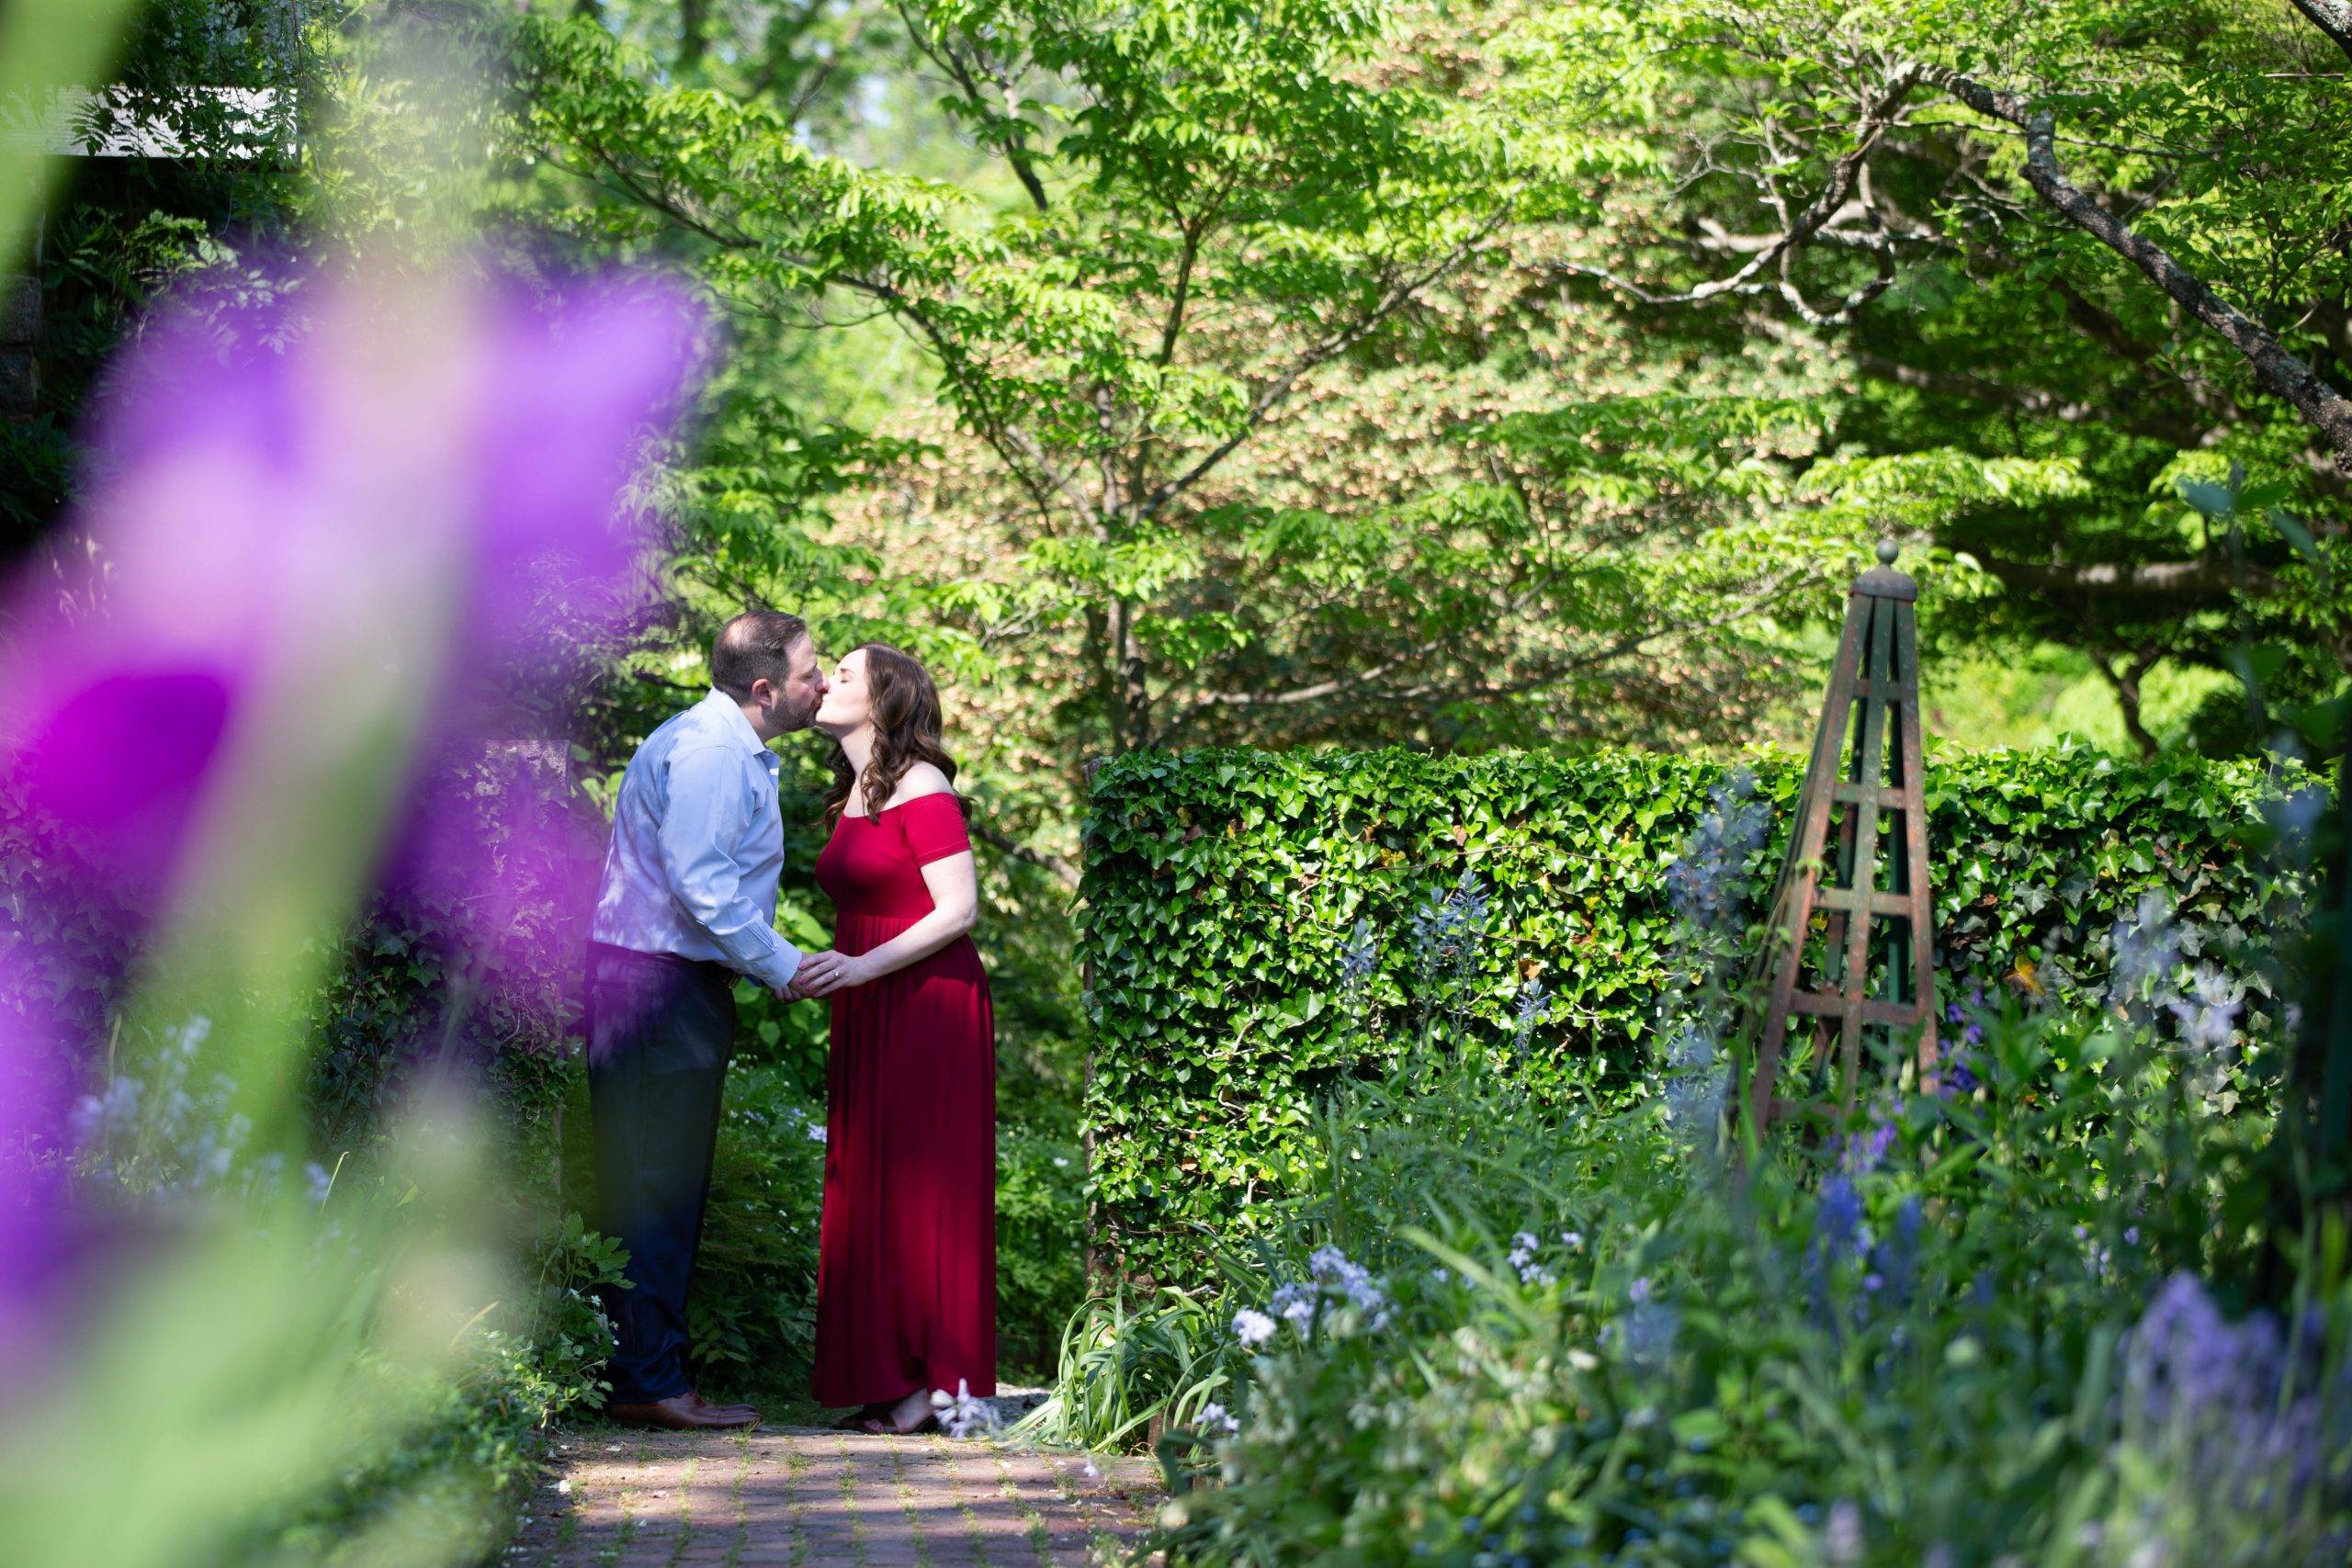 An engaged couple kissing in a garden.